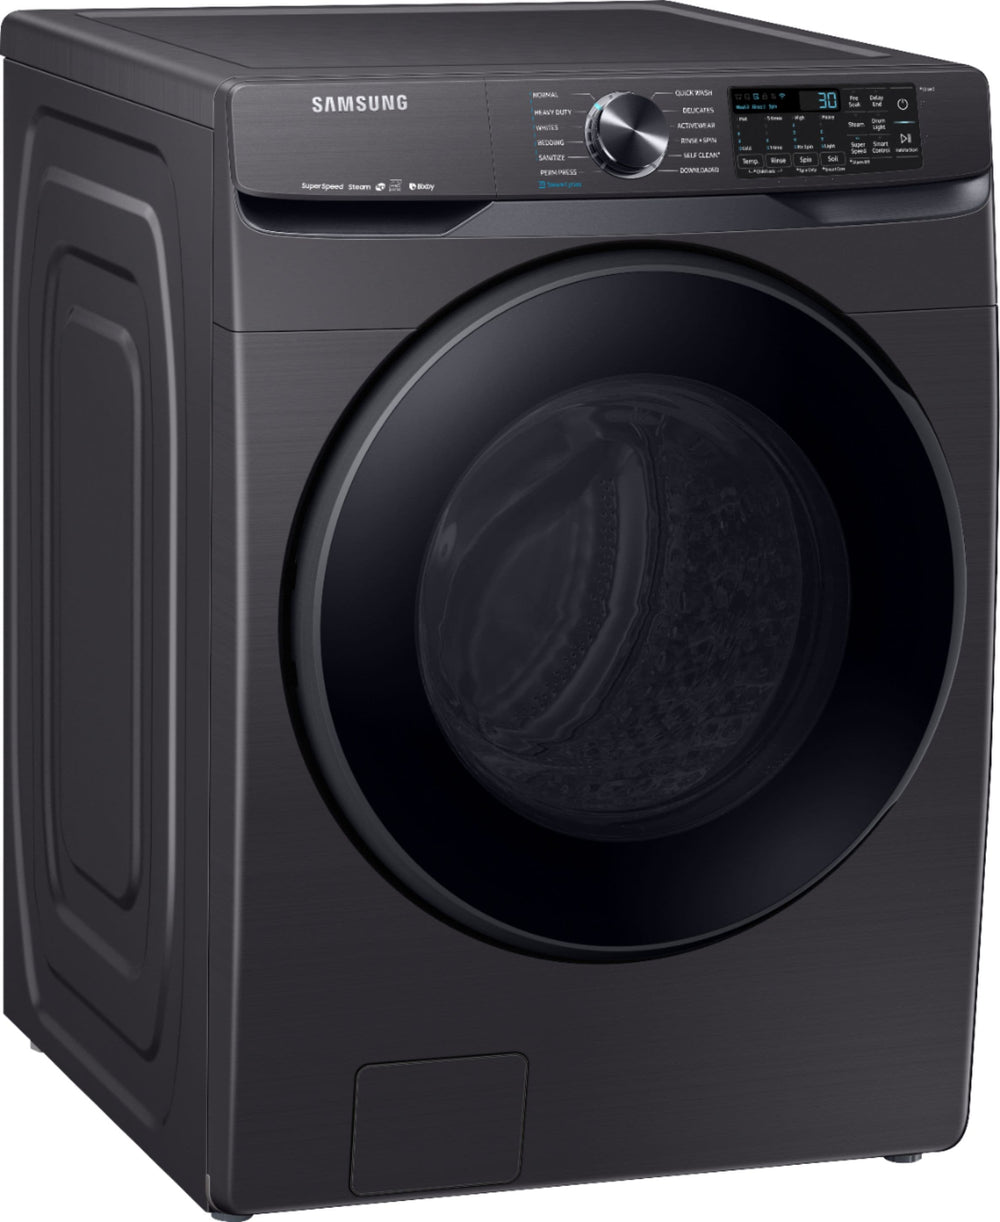 Samsung - 5.0 Cu. Ft.  High Efficiency Stackable Smart Front Load Washer with Steam - Black stainless steel_1